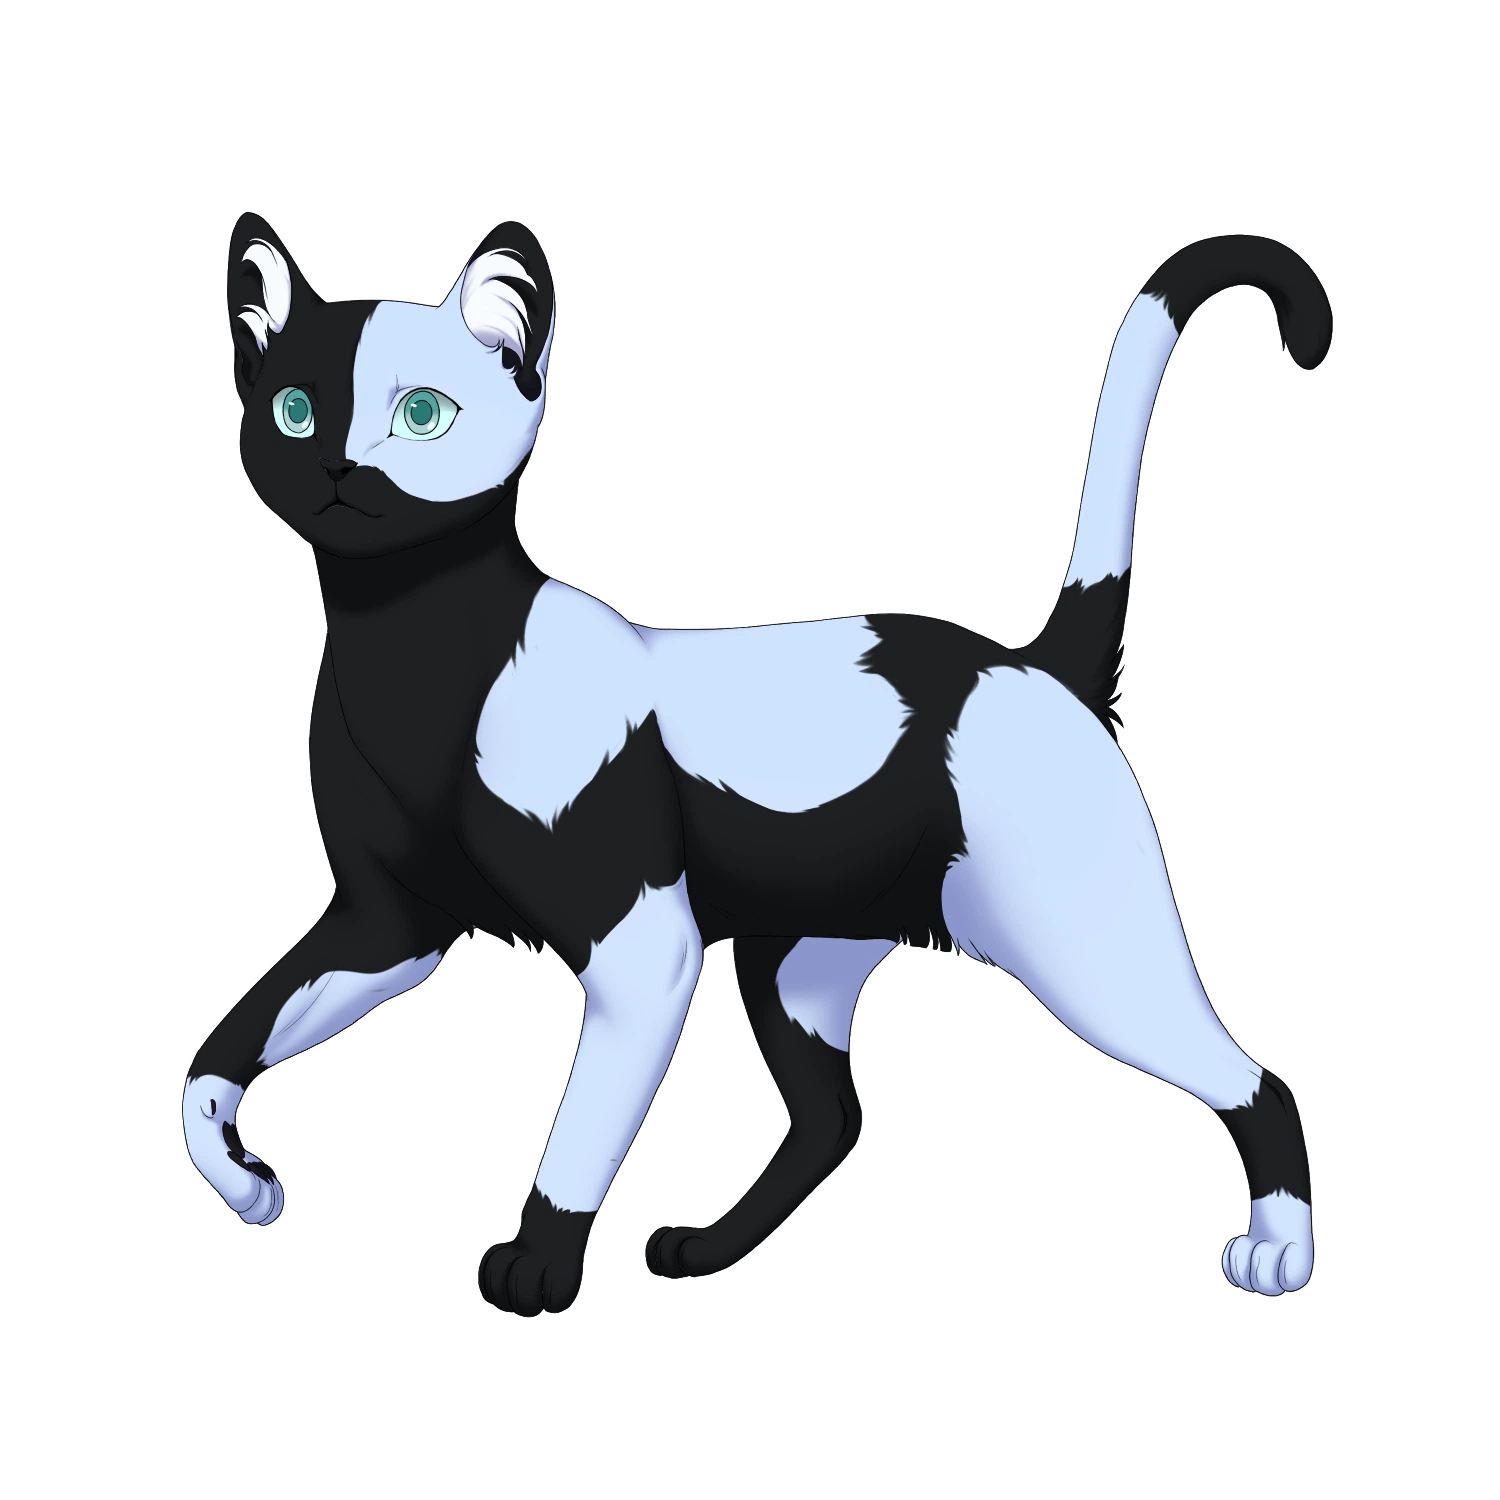 The cat is a black cat with light blue splotches and blue-green eyes. They are standing and alert.